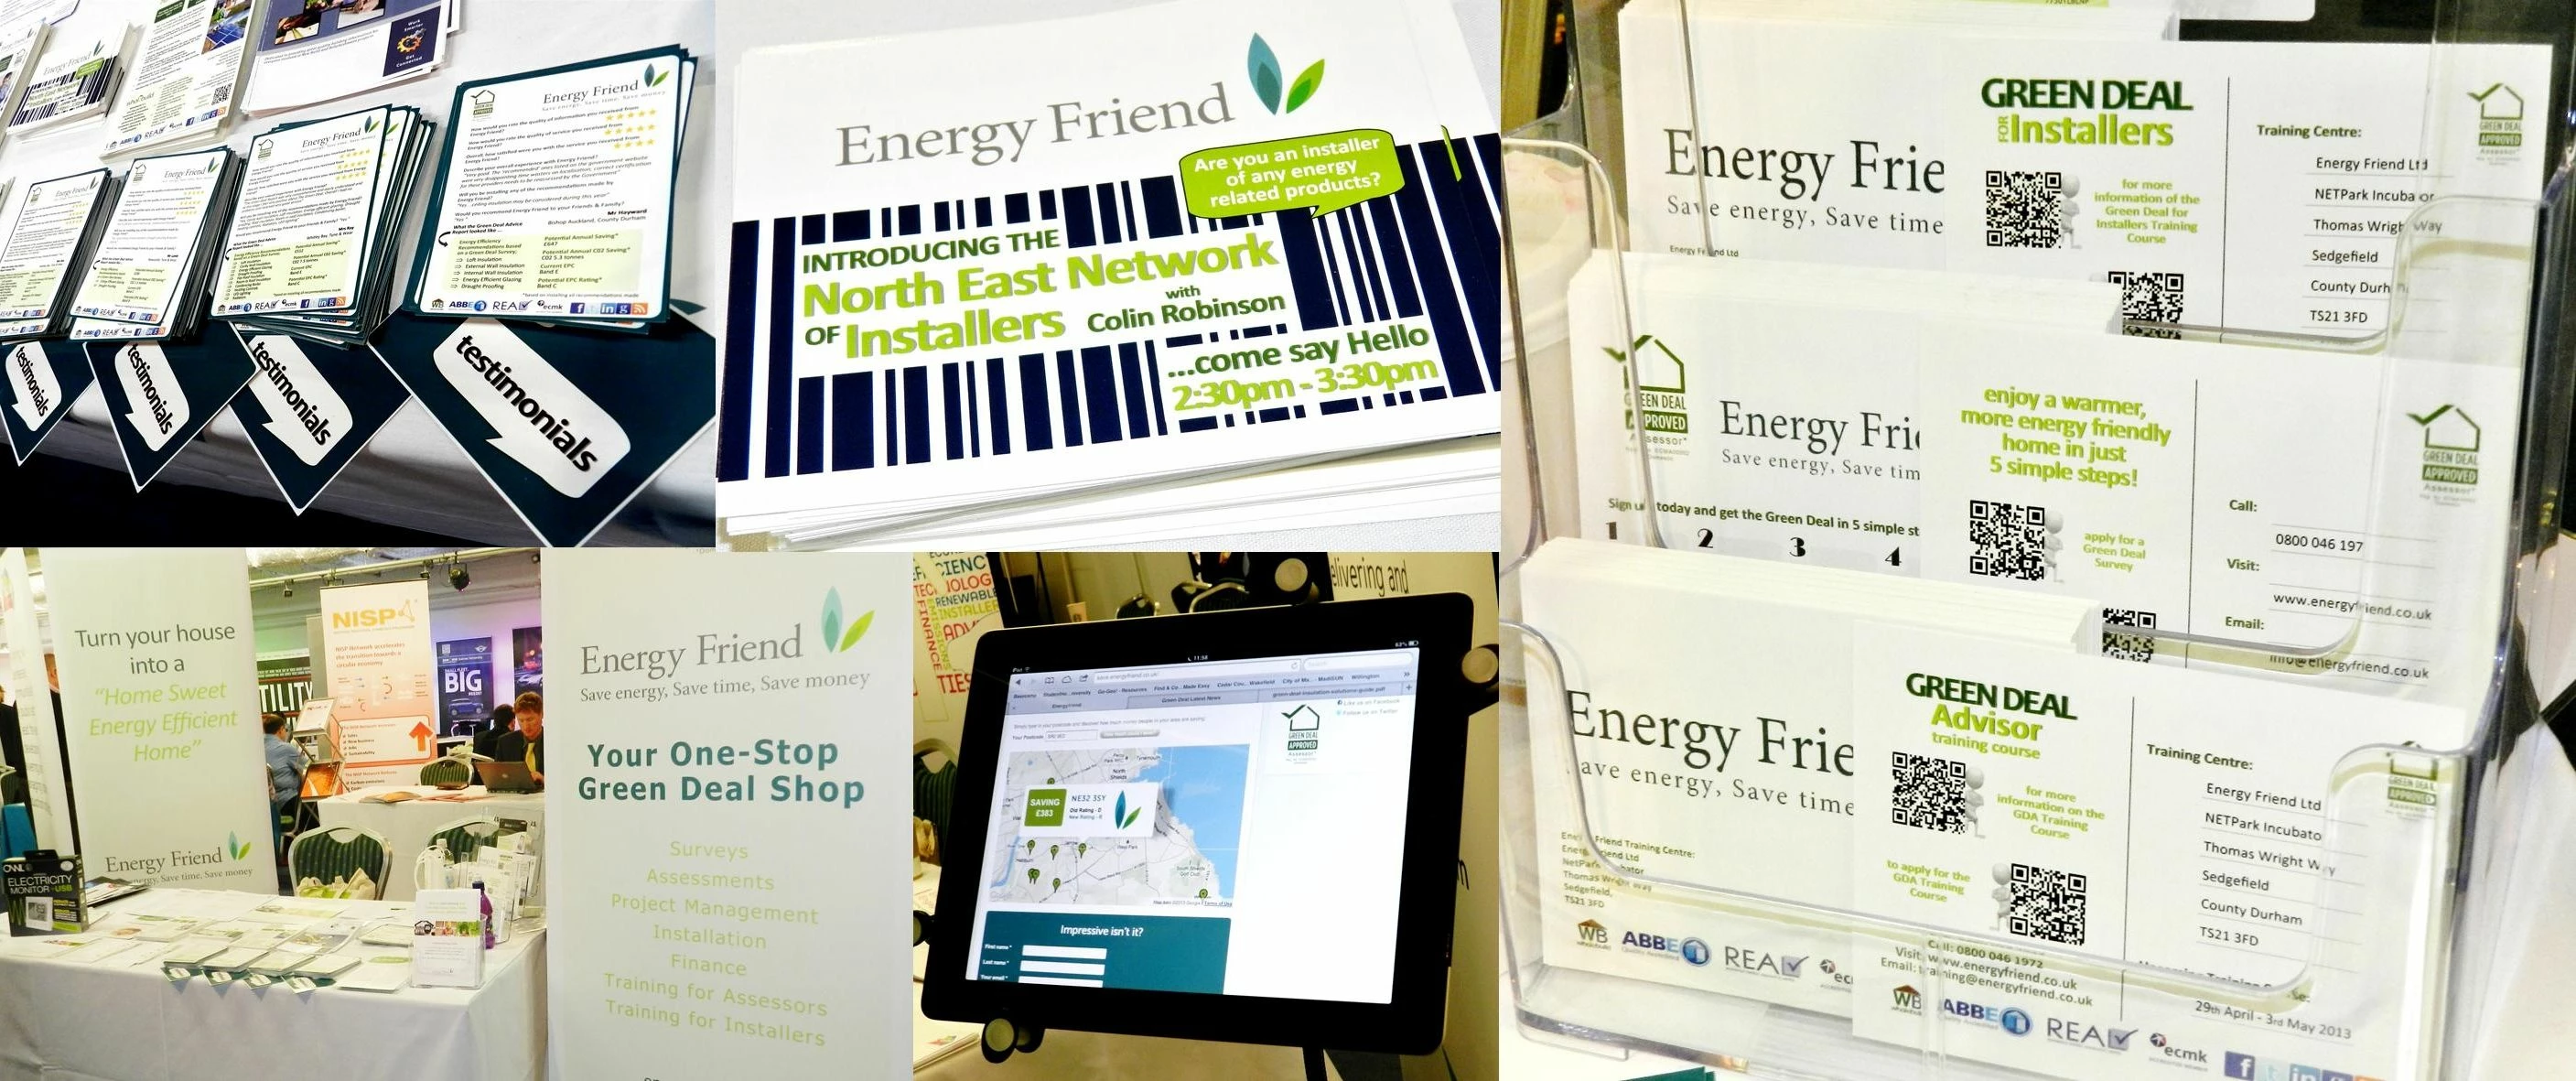 Energy Friend at The Big Eco Show 2013